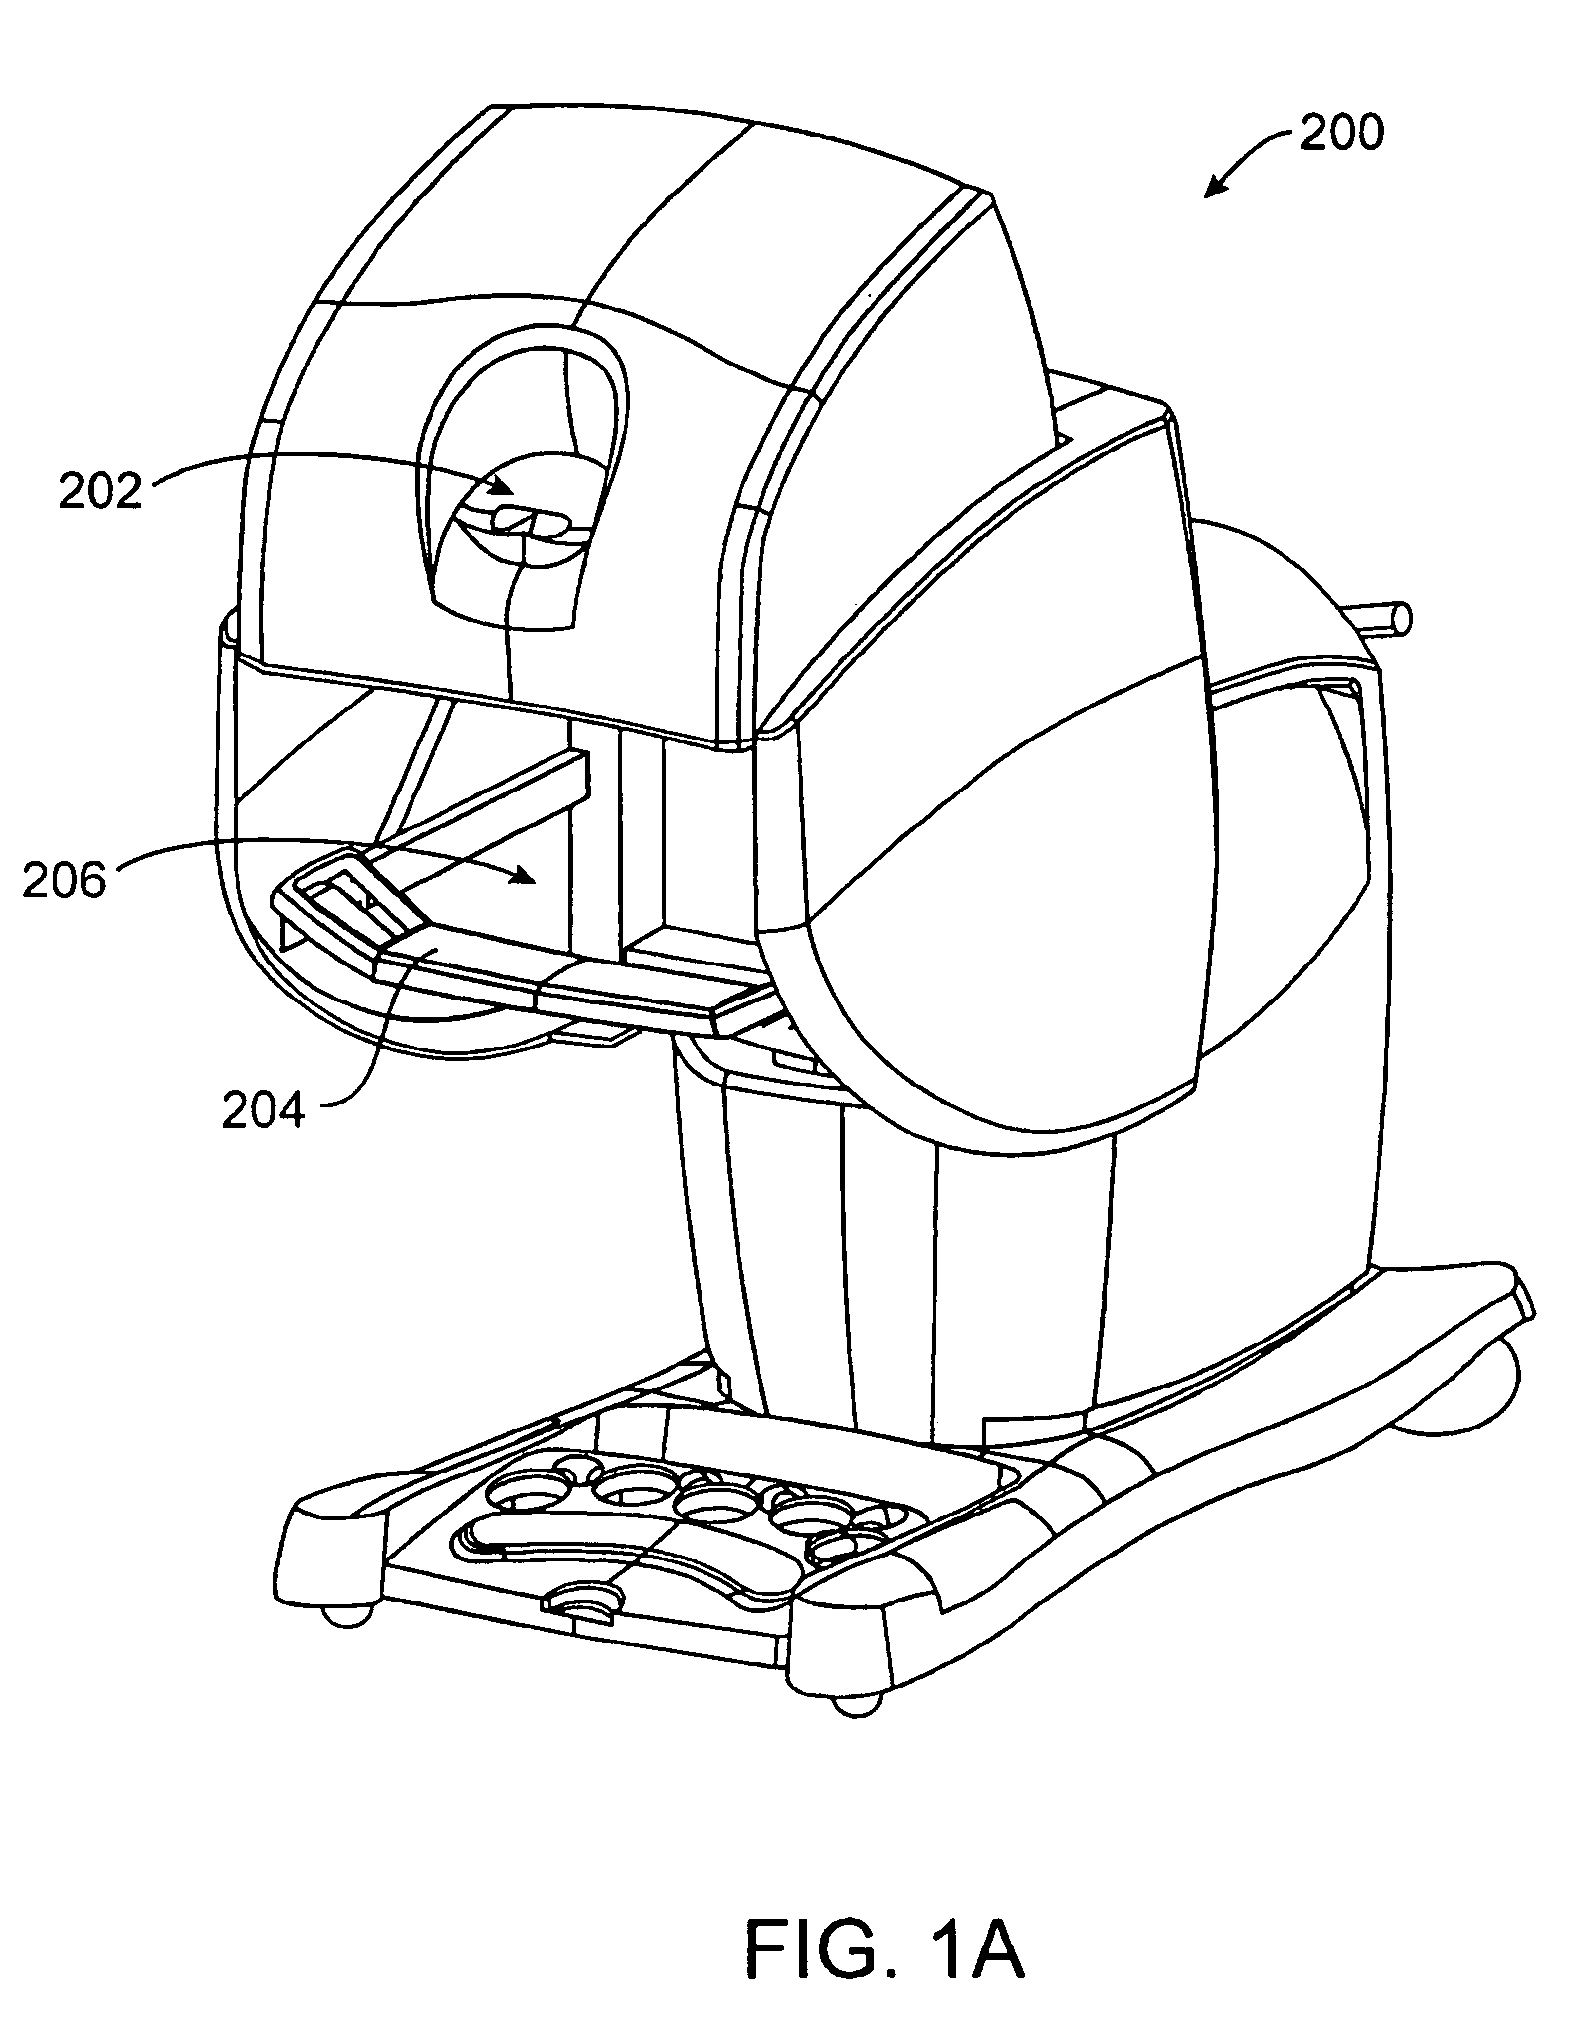 Friction compensation in a minimally invasive surgical apparatus